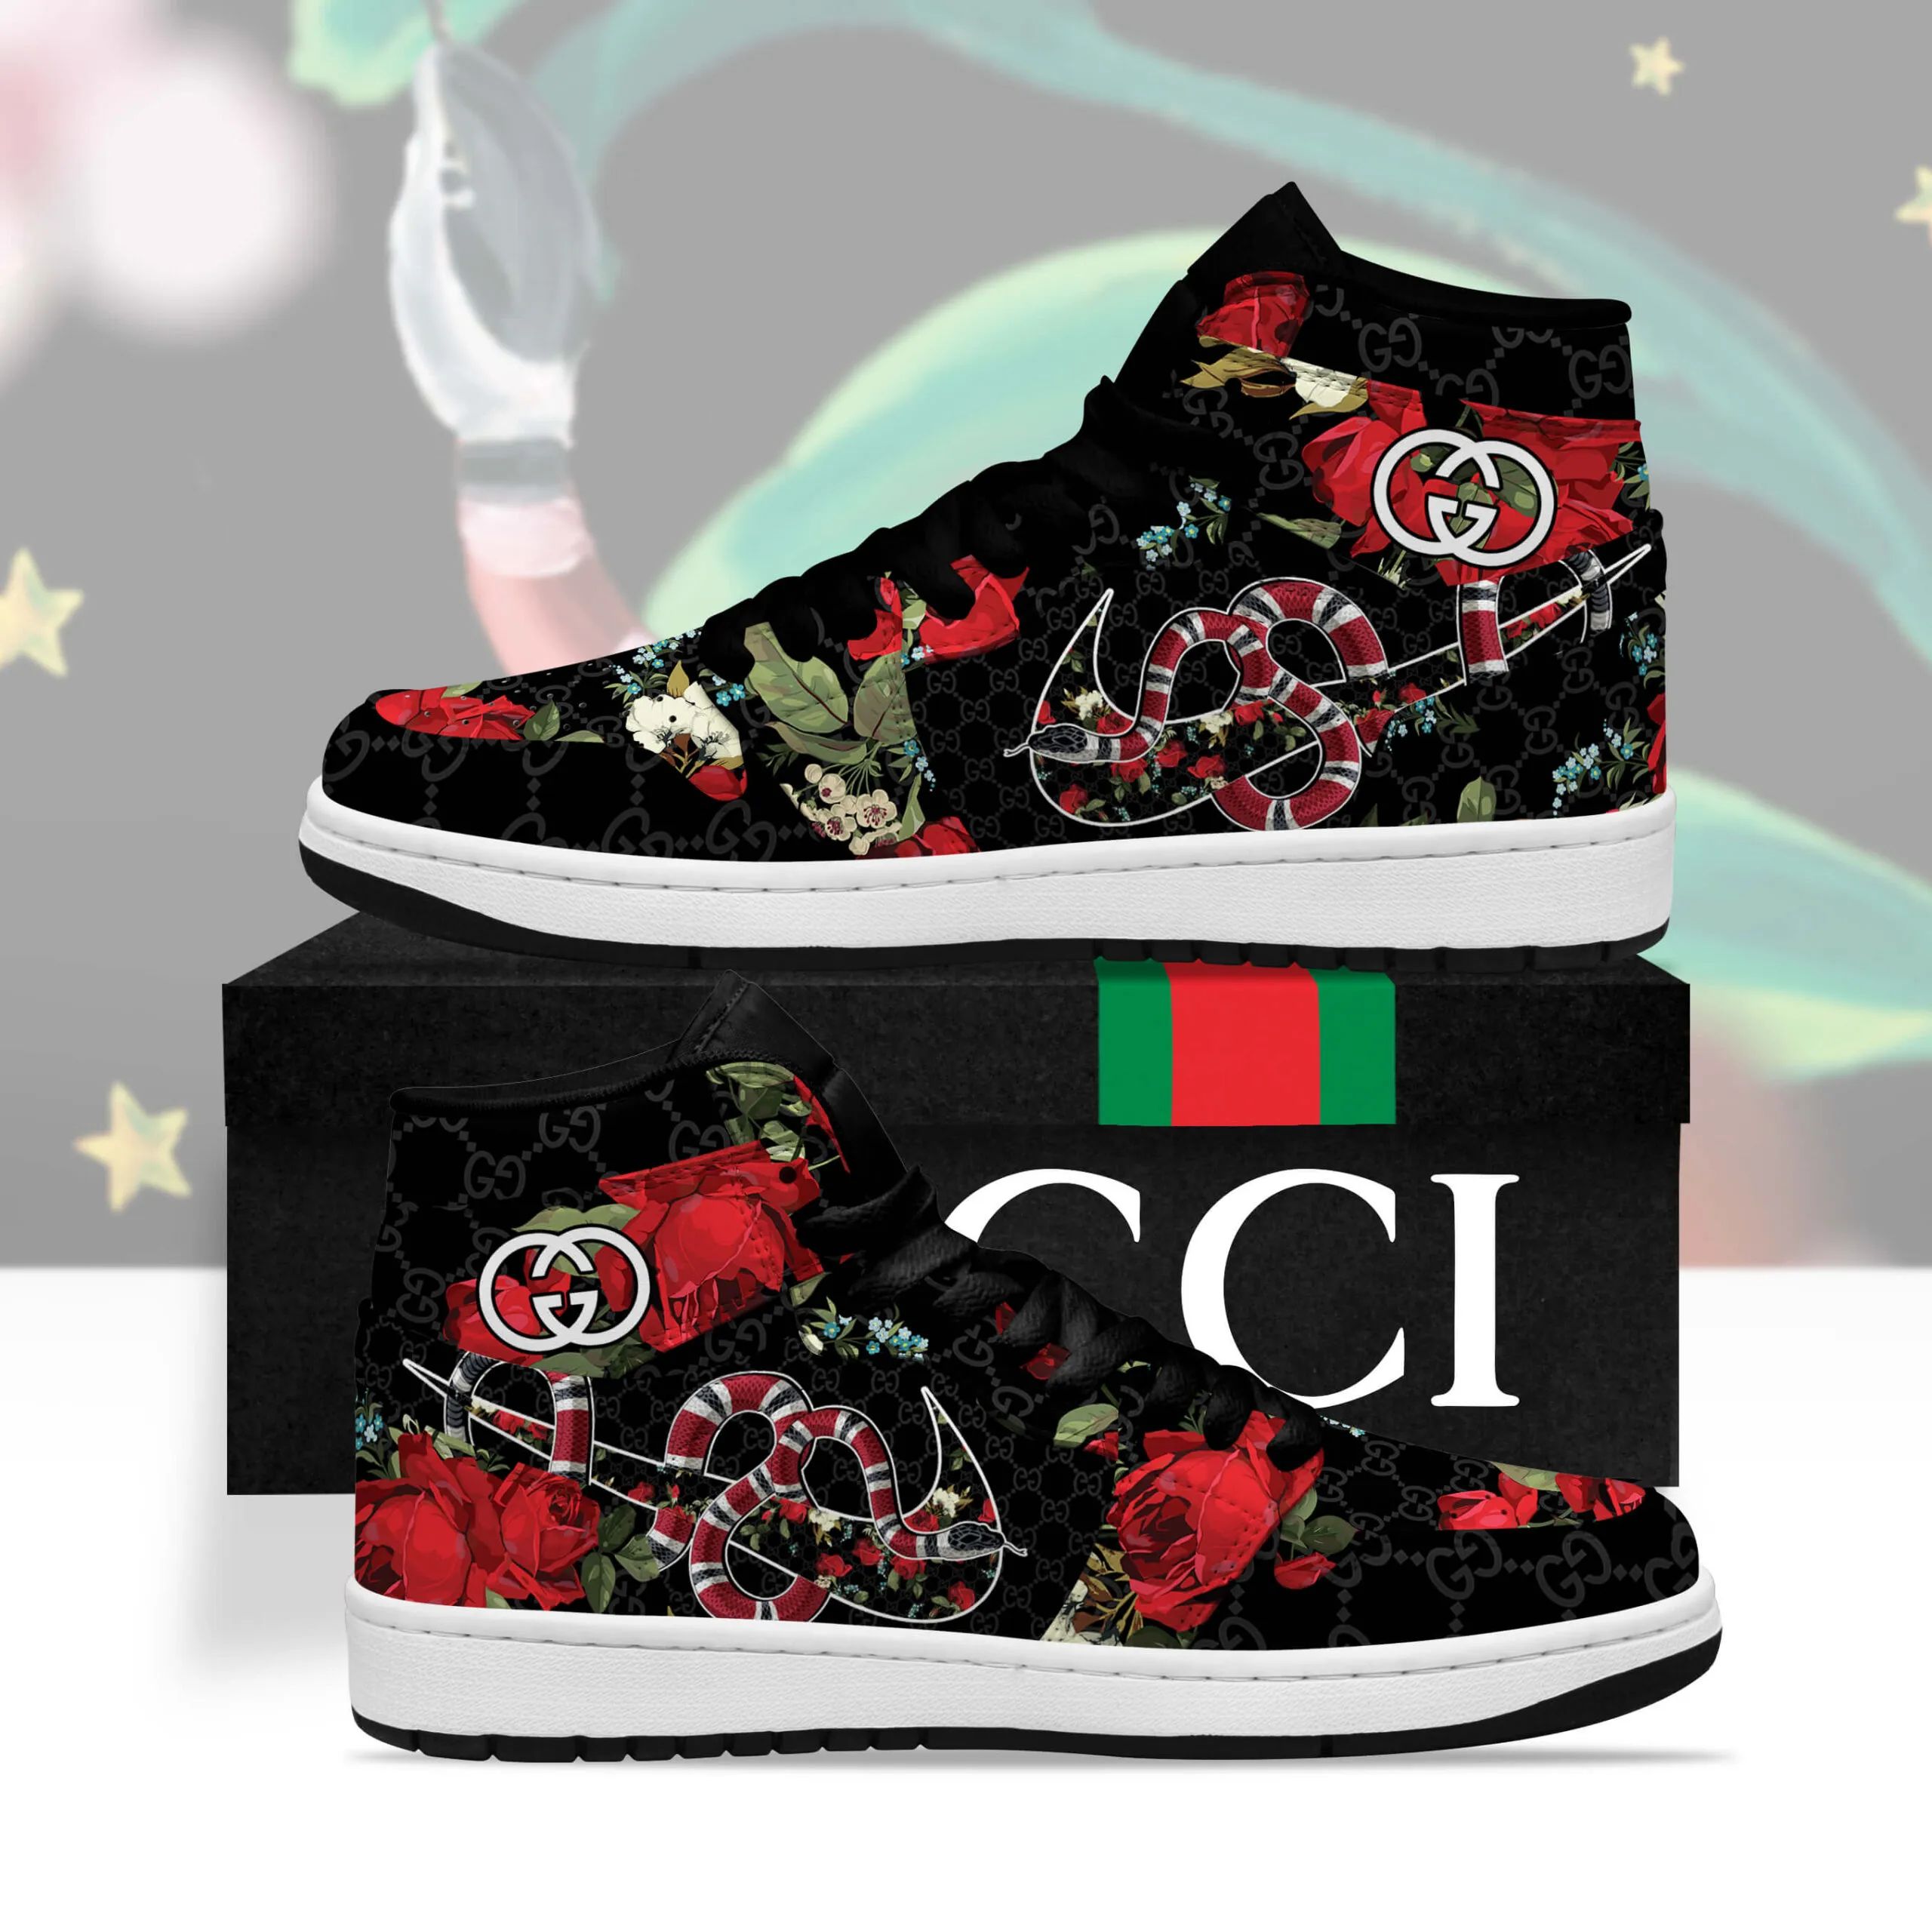 Gucci Snake Roses High Air Jordan Fashion Brand Luxury Shoes Sneakers